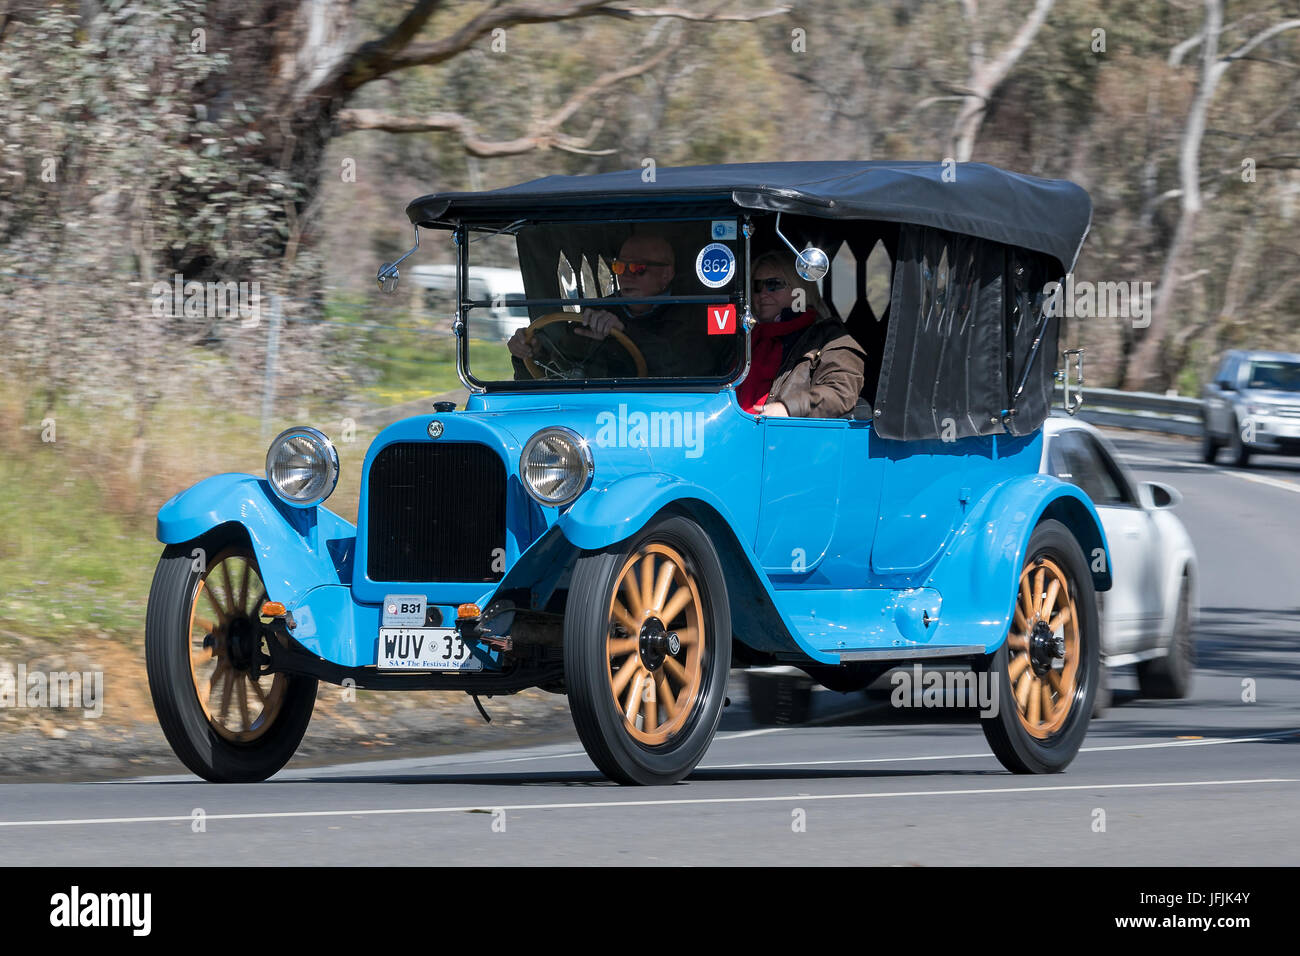 Vintage 1916 Dodge Tourer driving on country roads near the town of Birdwood, South Australia. Stock Photo